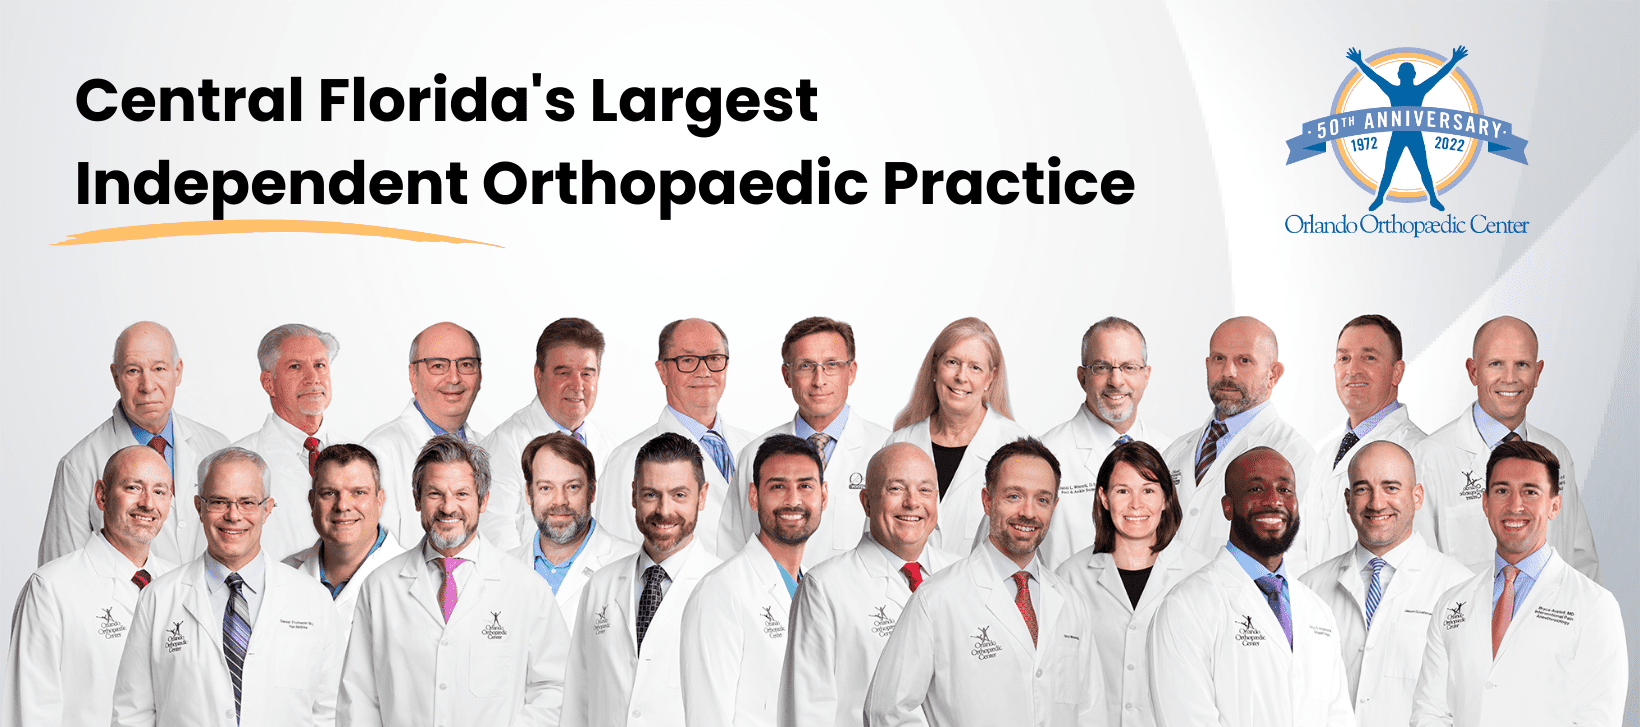 Orlando Orthopaedic Center 50 years photo with all current orthopaedic surgeons and physicians